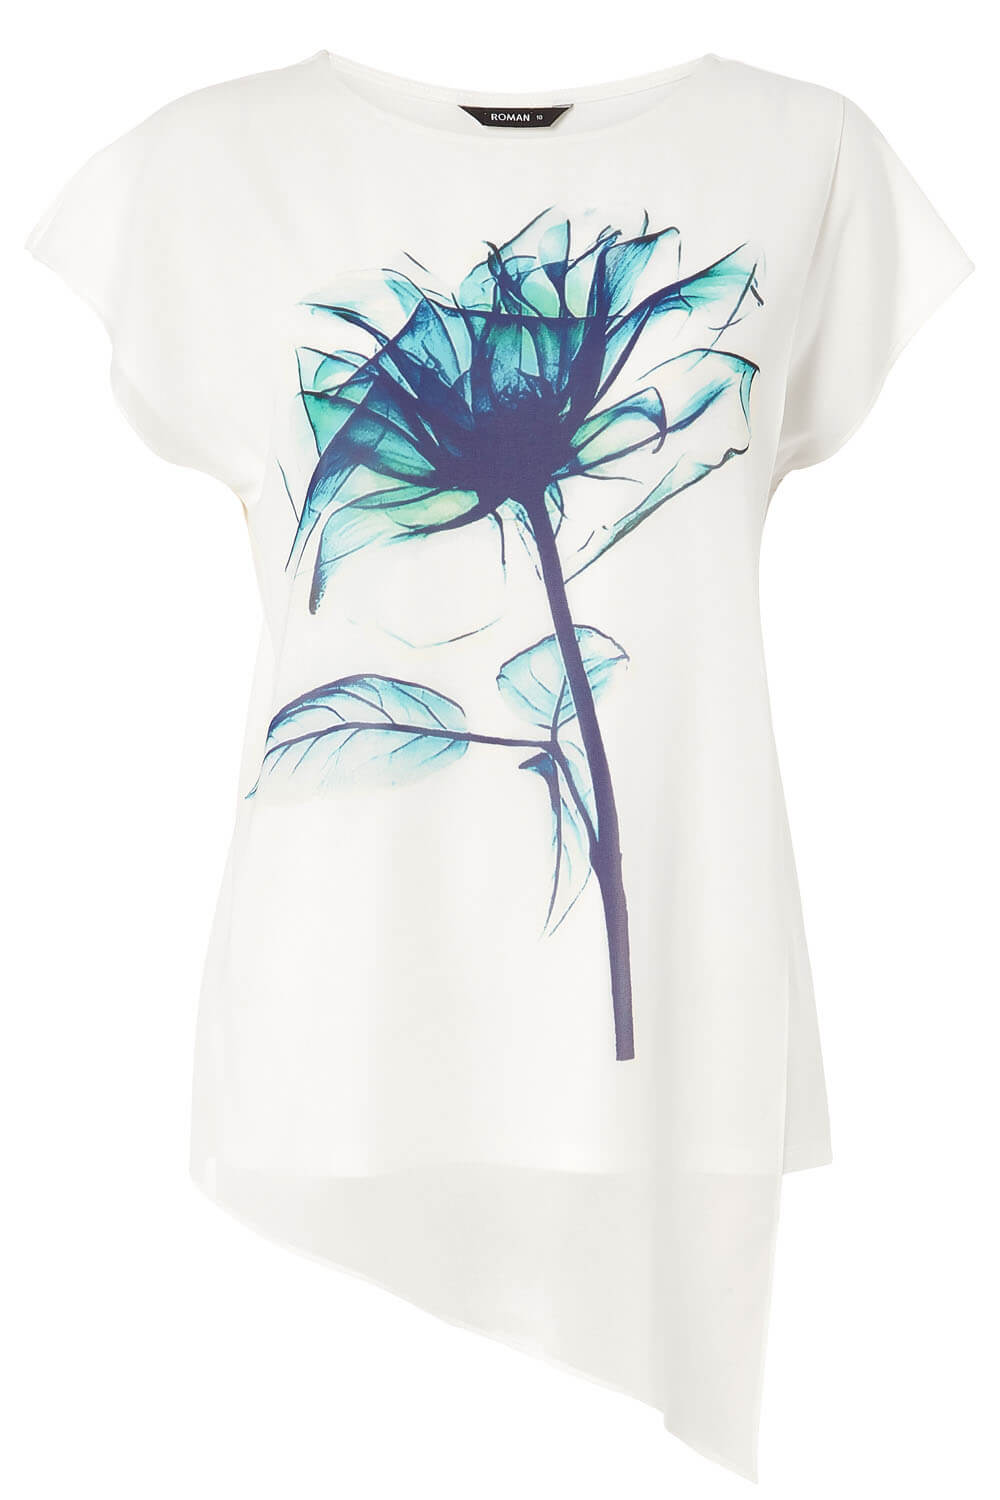 Aqua Blue Floral Placement Print Overlay Top, Image 5 of 5